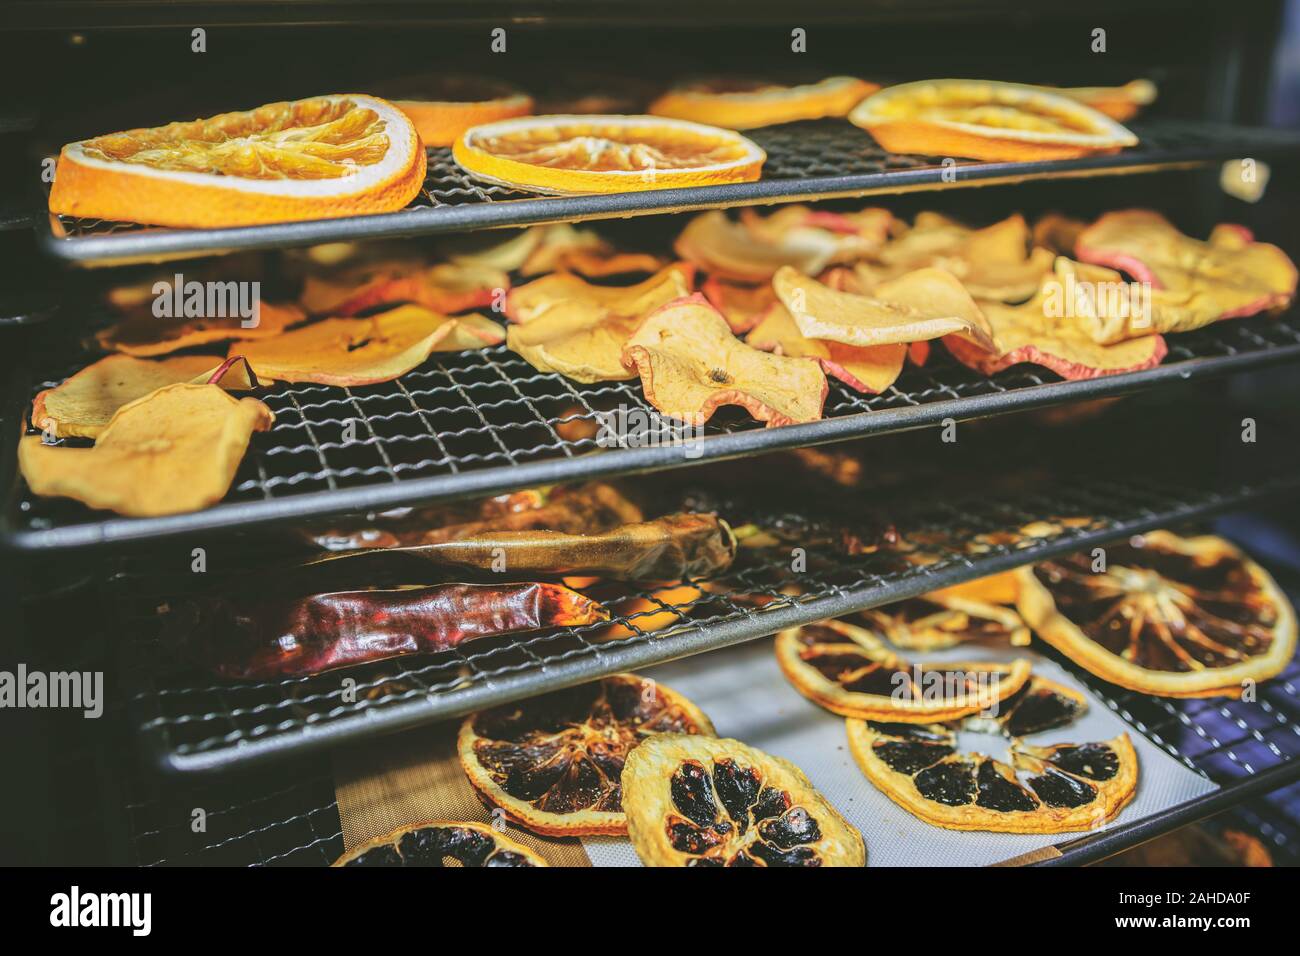 Concept of healthy home cooking - drying the fruit in the oven during the winter and holiday season (reduced tones) Stock Photo